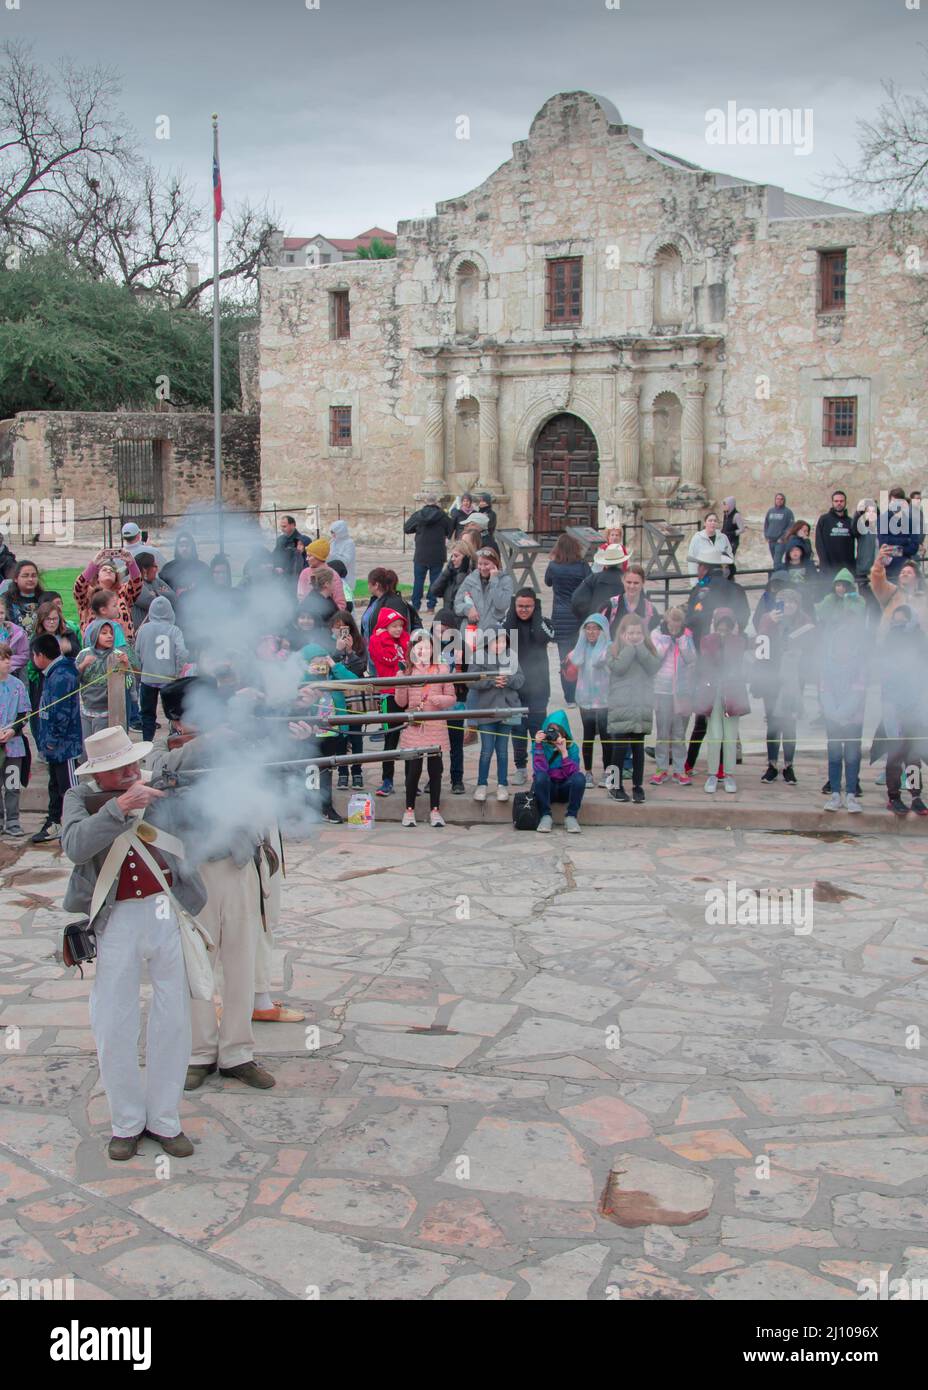 Visitors watch a demonstration of firing muskets at the Alamo in San Antonio, Texas Stock Photo